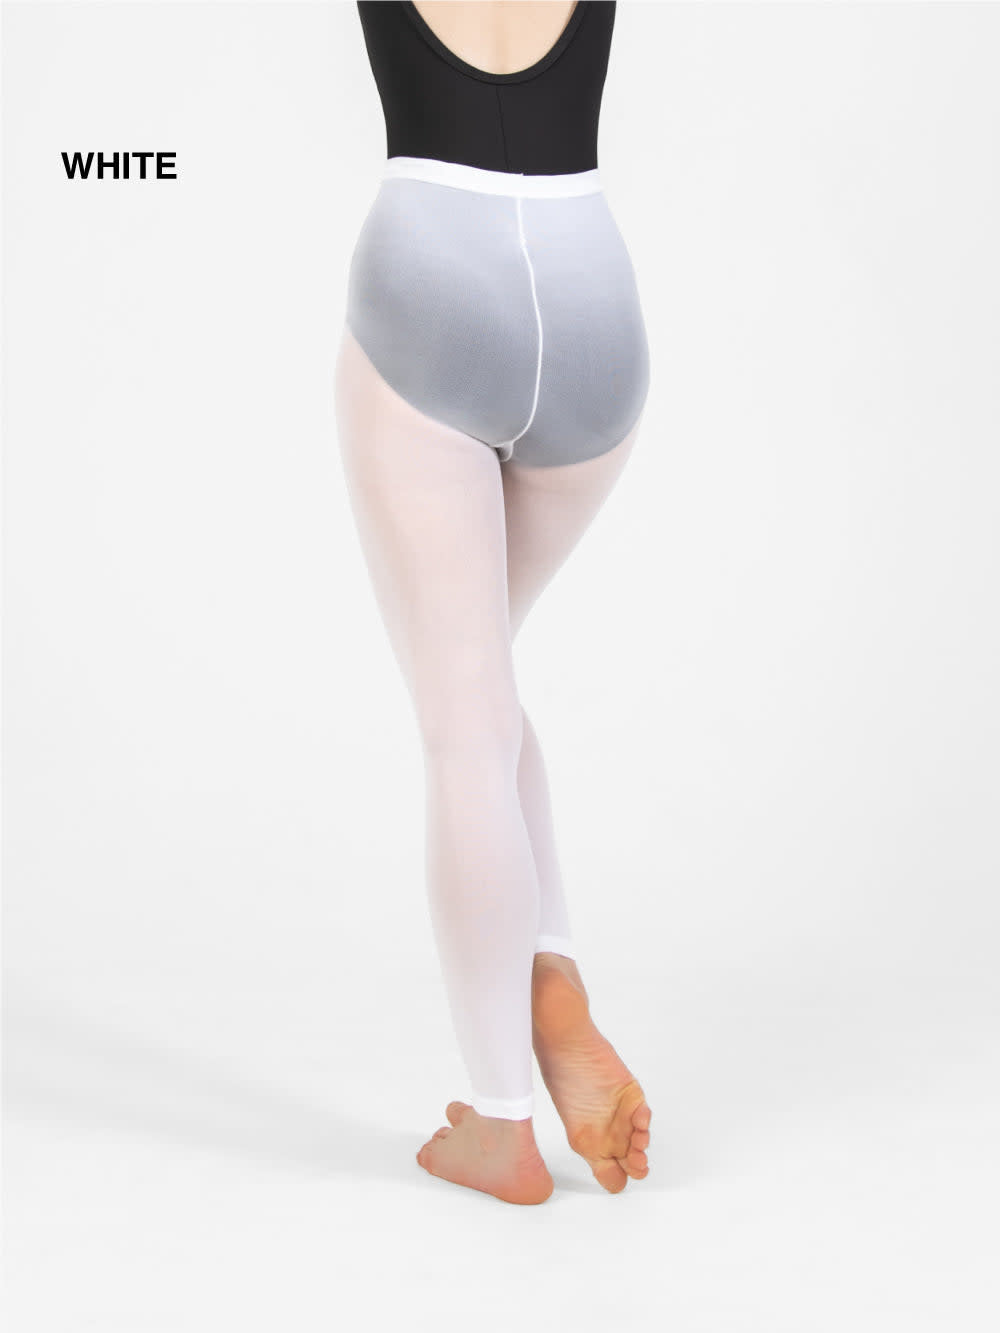 Large / X-Large, Suntan) - Body Wrappers Footless Tights 